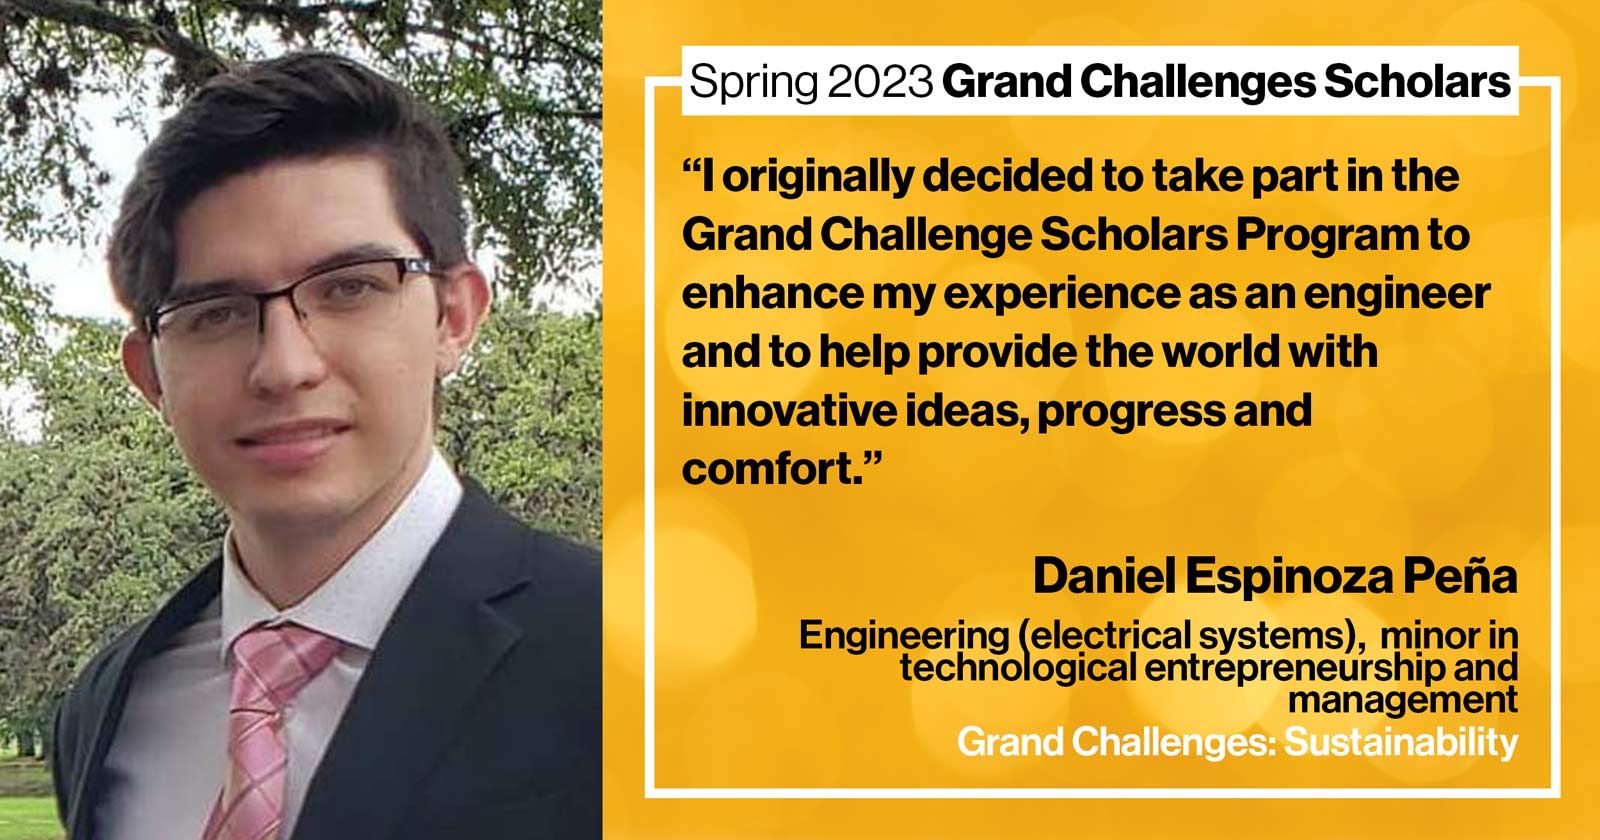 "Daniel Espinoza Peña Engineering (electrical systems) Grand Challenge: Sustainability Quote: “I originally decided to take part in the Grand Challenge Scholars Program to enhance my experience as an engineer and to help provide the world with innovative ideas, progress, and comfort.”"